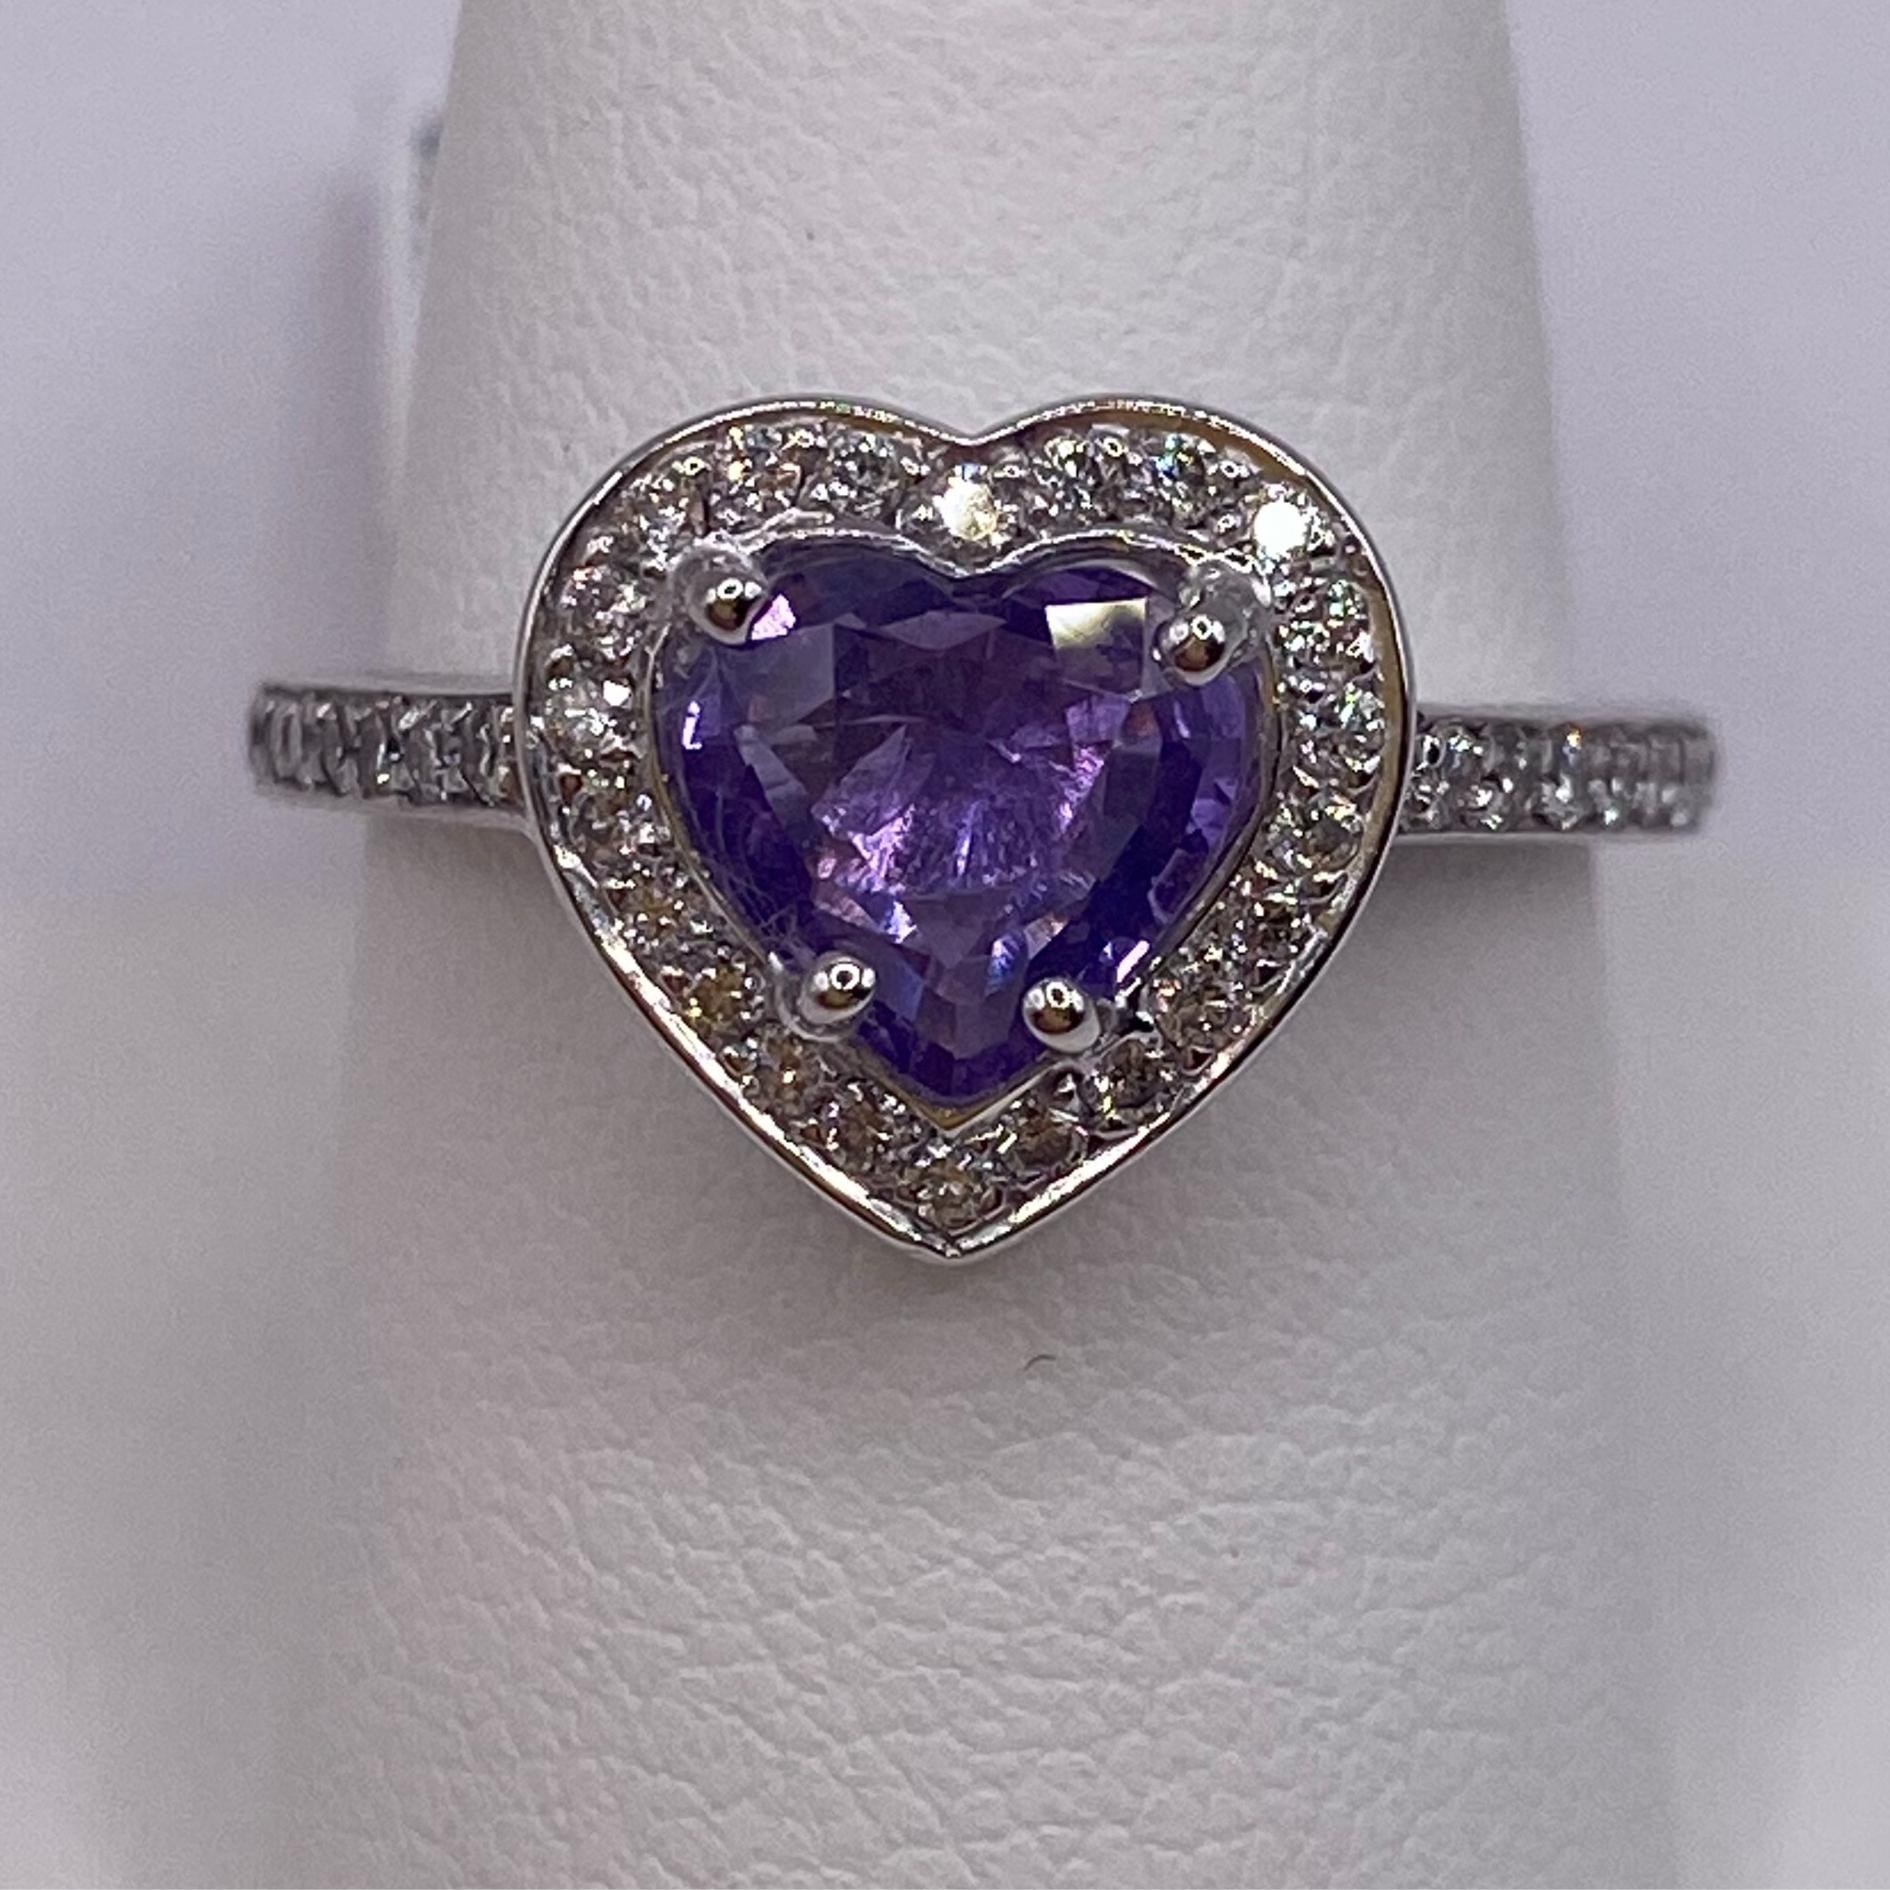 14KT White Gold
Finger Size: 6.5
(Ring is size 6.5, but is sizable upon request)

Number of Heart Shape Sapphires: 1
Carat Weight: 1.06ct
Stone Size: 6.5 x 7.0mm

Number of Round Diamonds: 38
Carat Weight: 0.33ctw

This lovely ring features a sweet